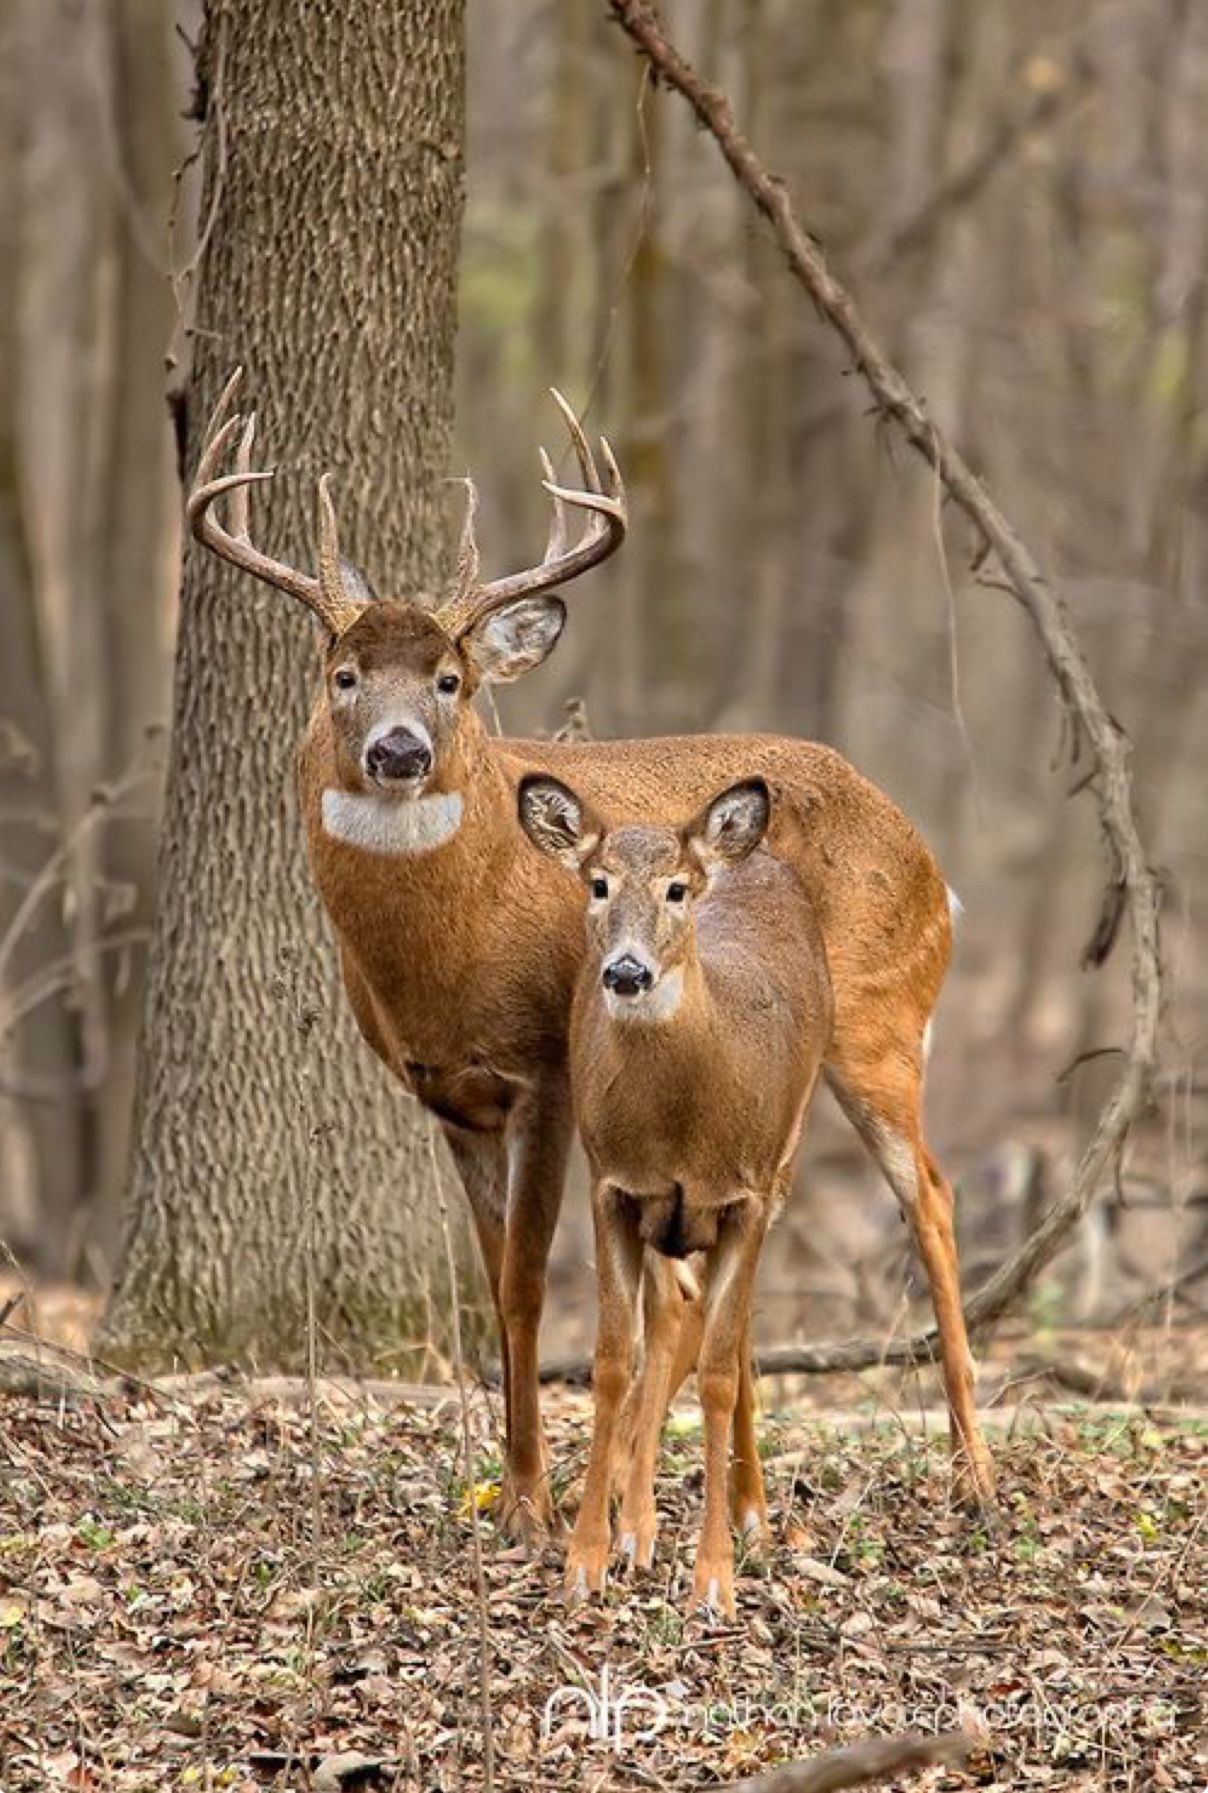 Whitetail buck and doe—a handsome couple!. Whitetail deer picture, Whitetail deer, Deer photo